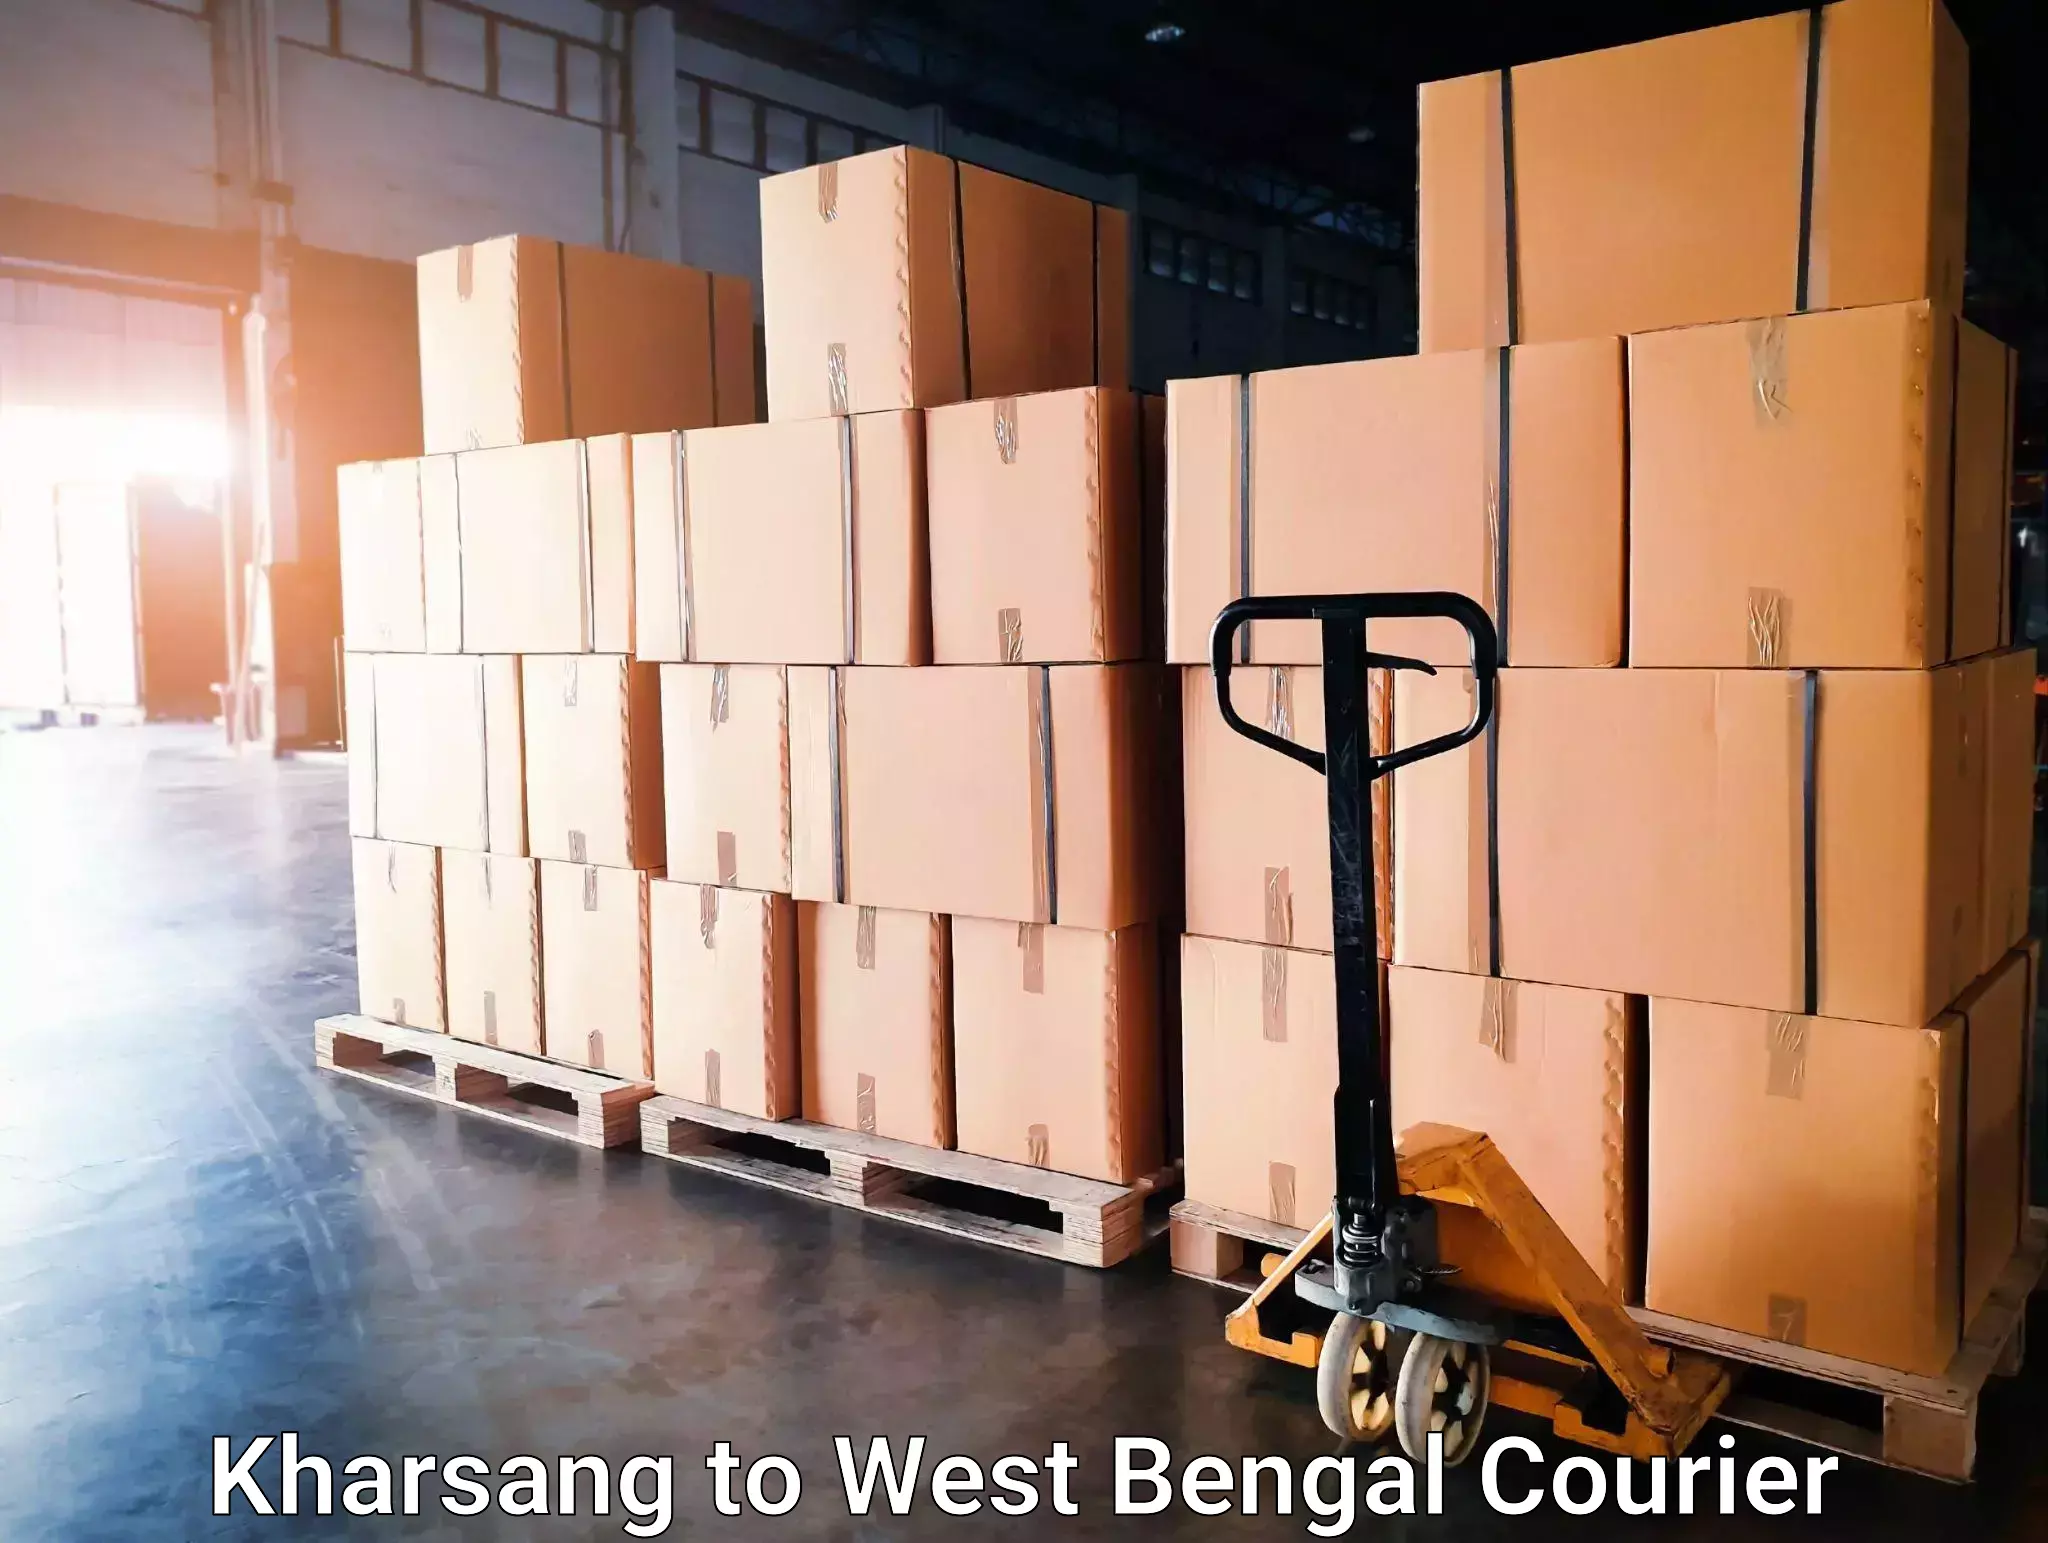 Advanced tracking systems in Kharsang to West Bengal